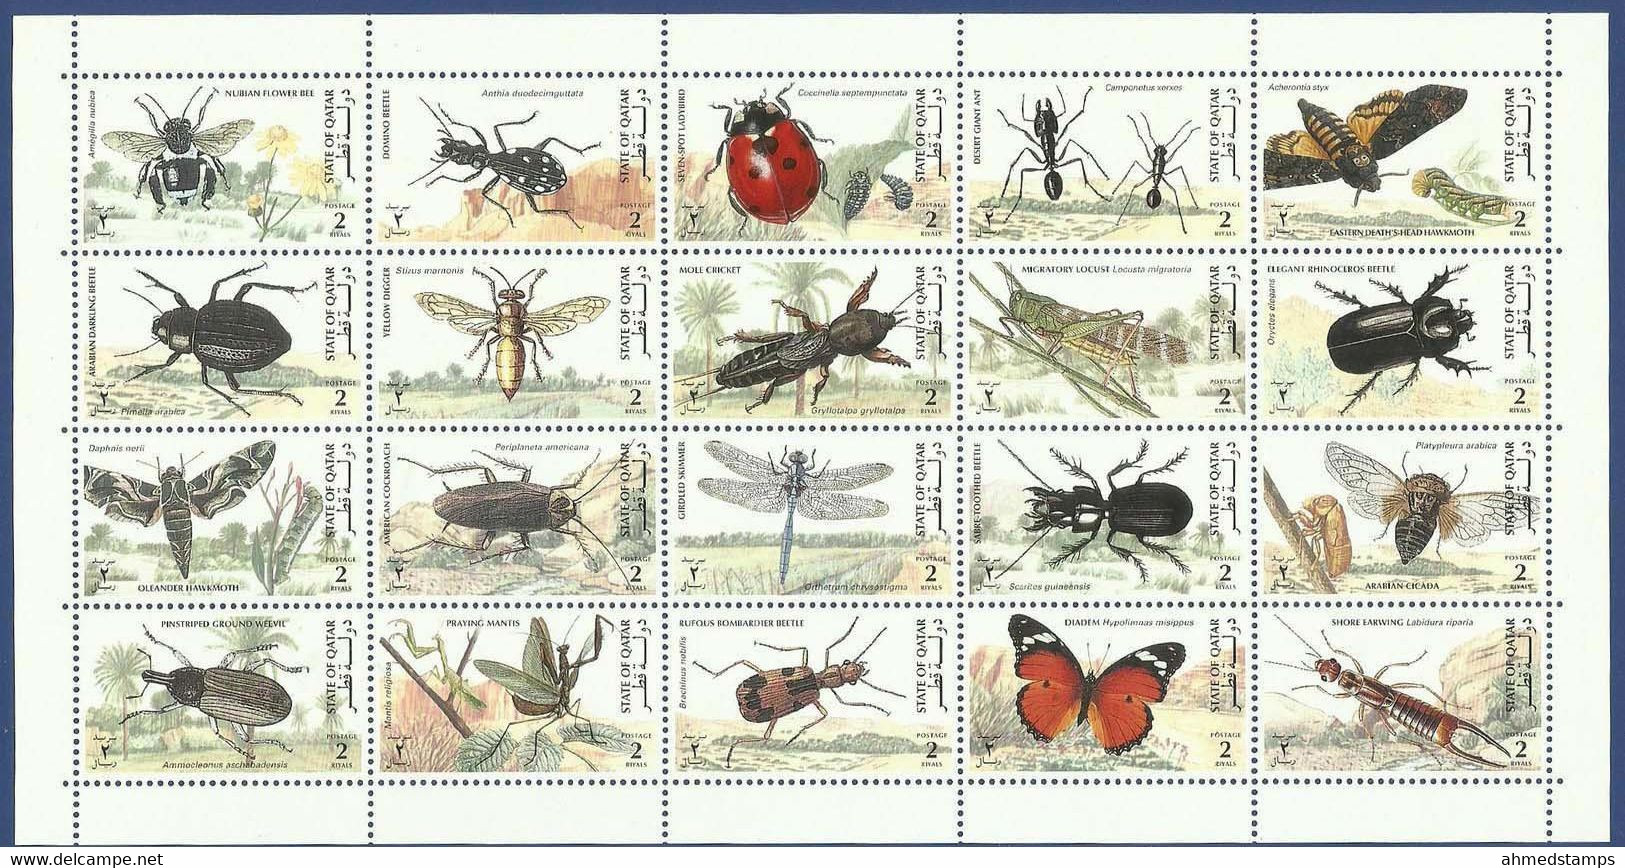 QATAR MNH 1998 INSECTS SHEETLET BUTTERFLIES BUTTERFLY MOTHS ANTS INSECT - Qatar